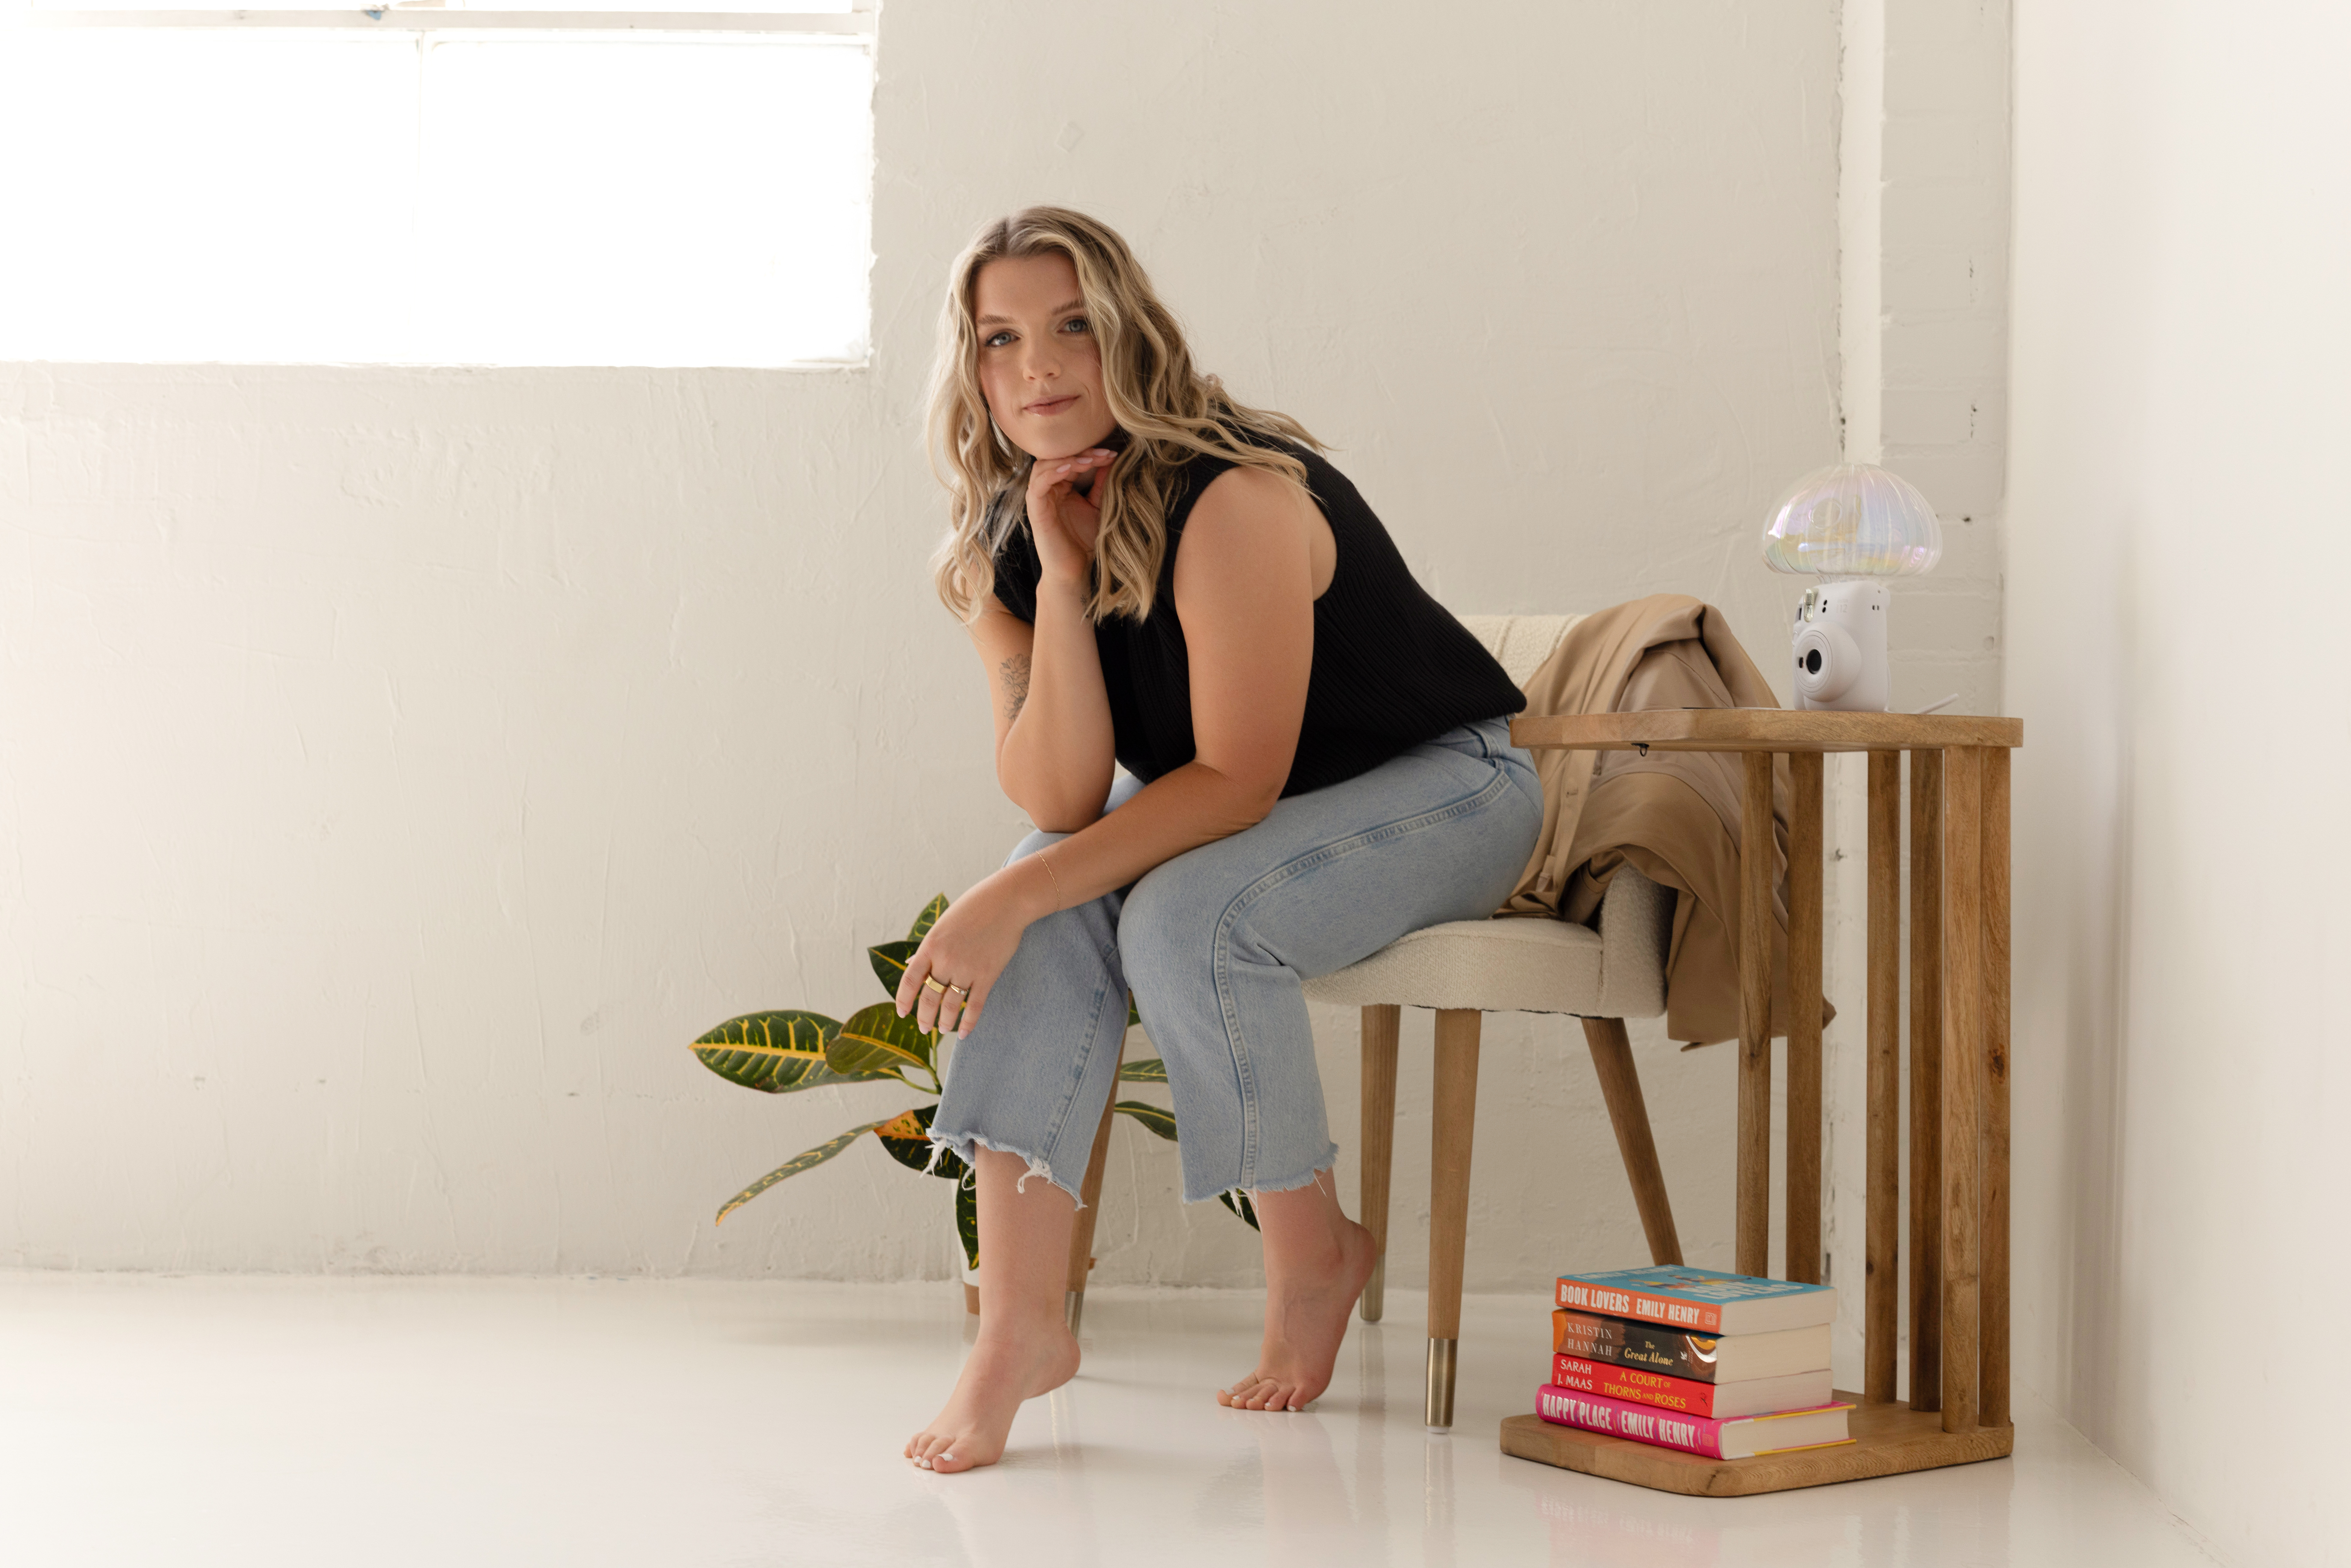 How to Increase Your Inquiries During a Slow Season | Reveal Studio Co Kaili Meyers wearing a black top and light jeans sitting on a armless chair against a white brick background.